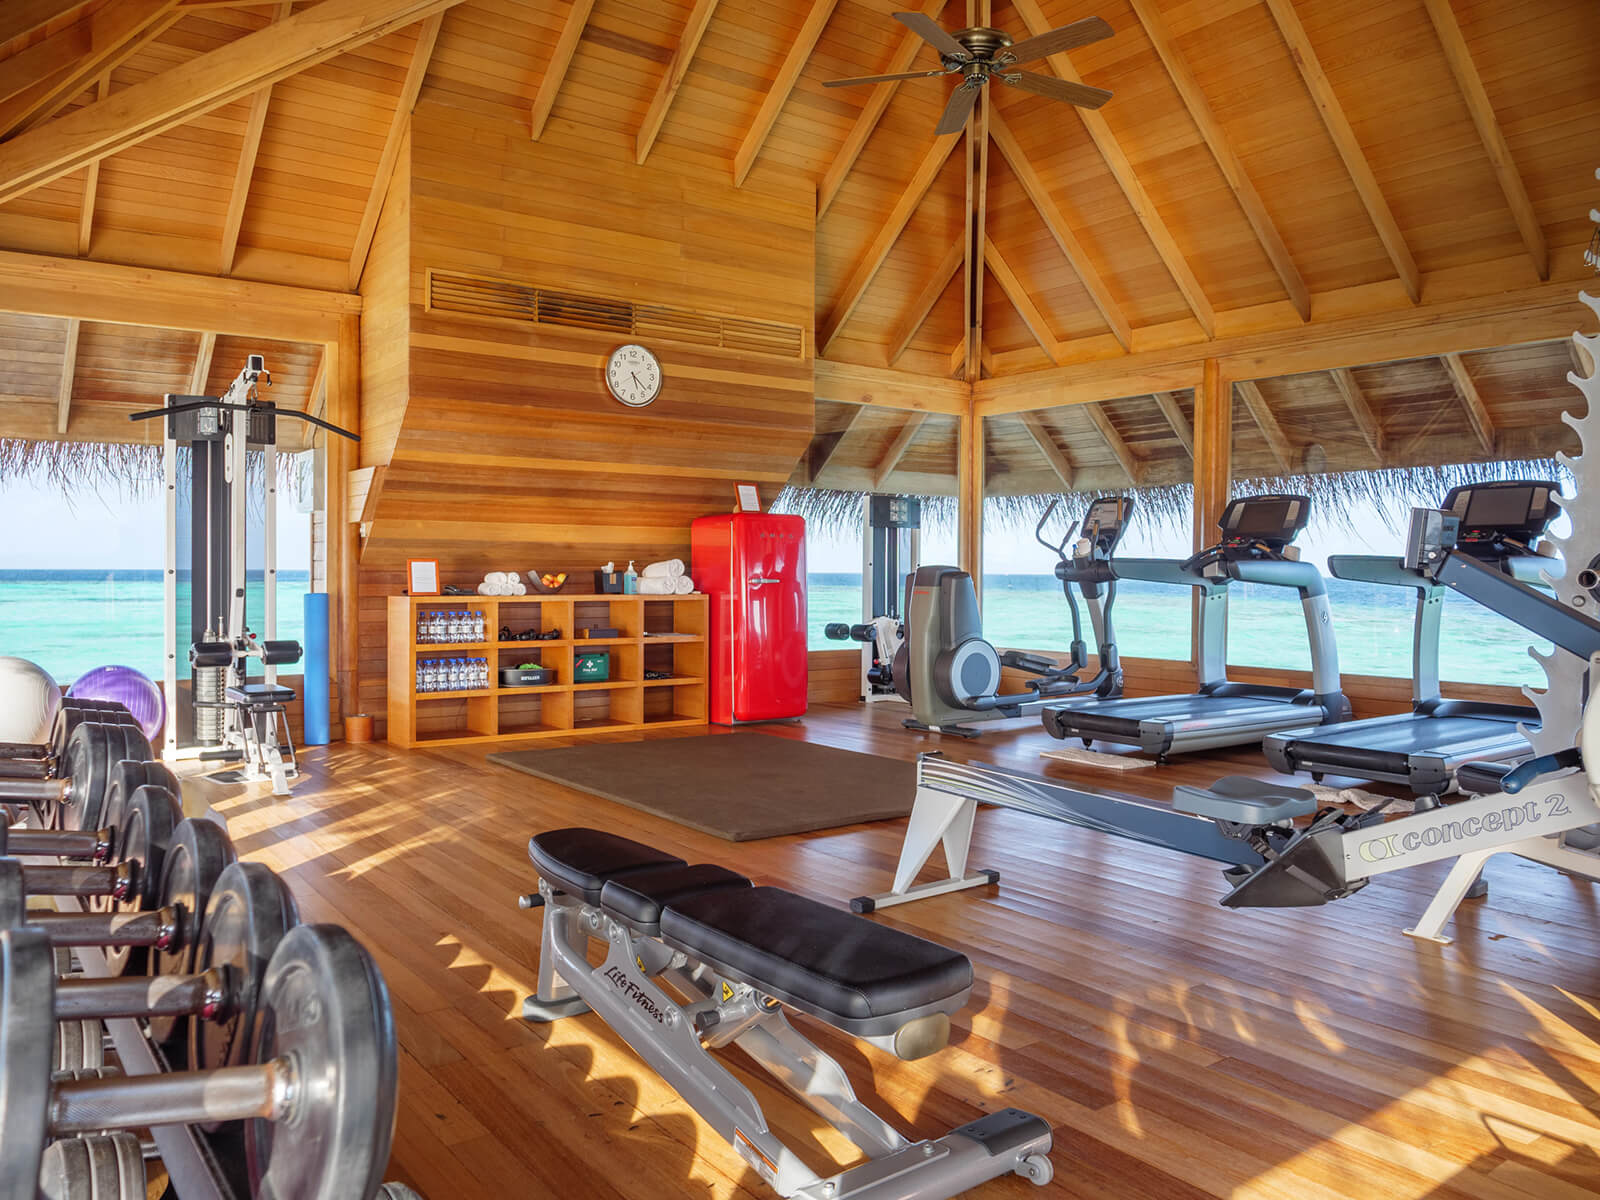 Turn your workout into a tranquil escape. Let the calming embrace of the Indian Ocean be the soundtrack of your fitness routine. Feel your muscles awaken with each rep, then melt into post-workout bliss as the ocean breeze washes over you. It's exercise meets paradise.